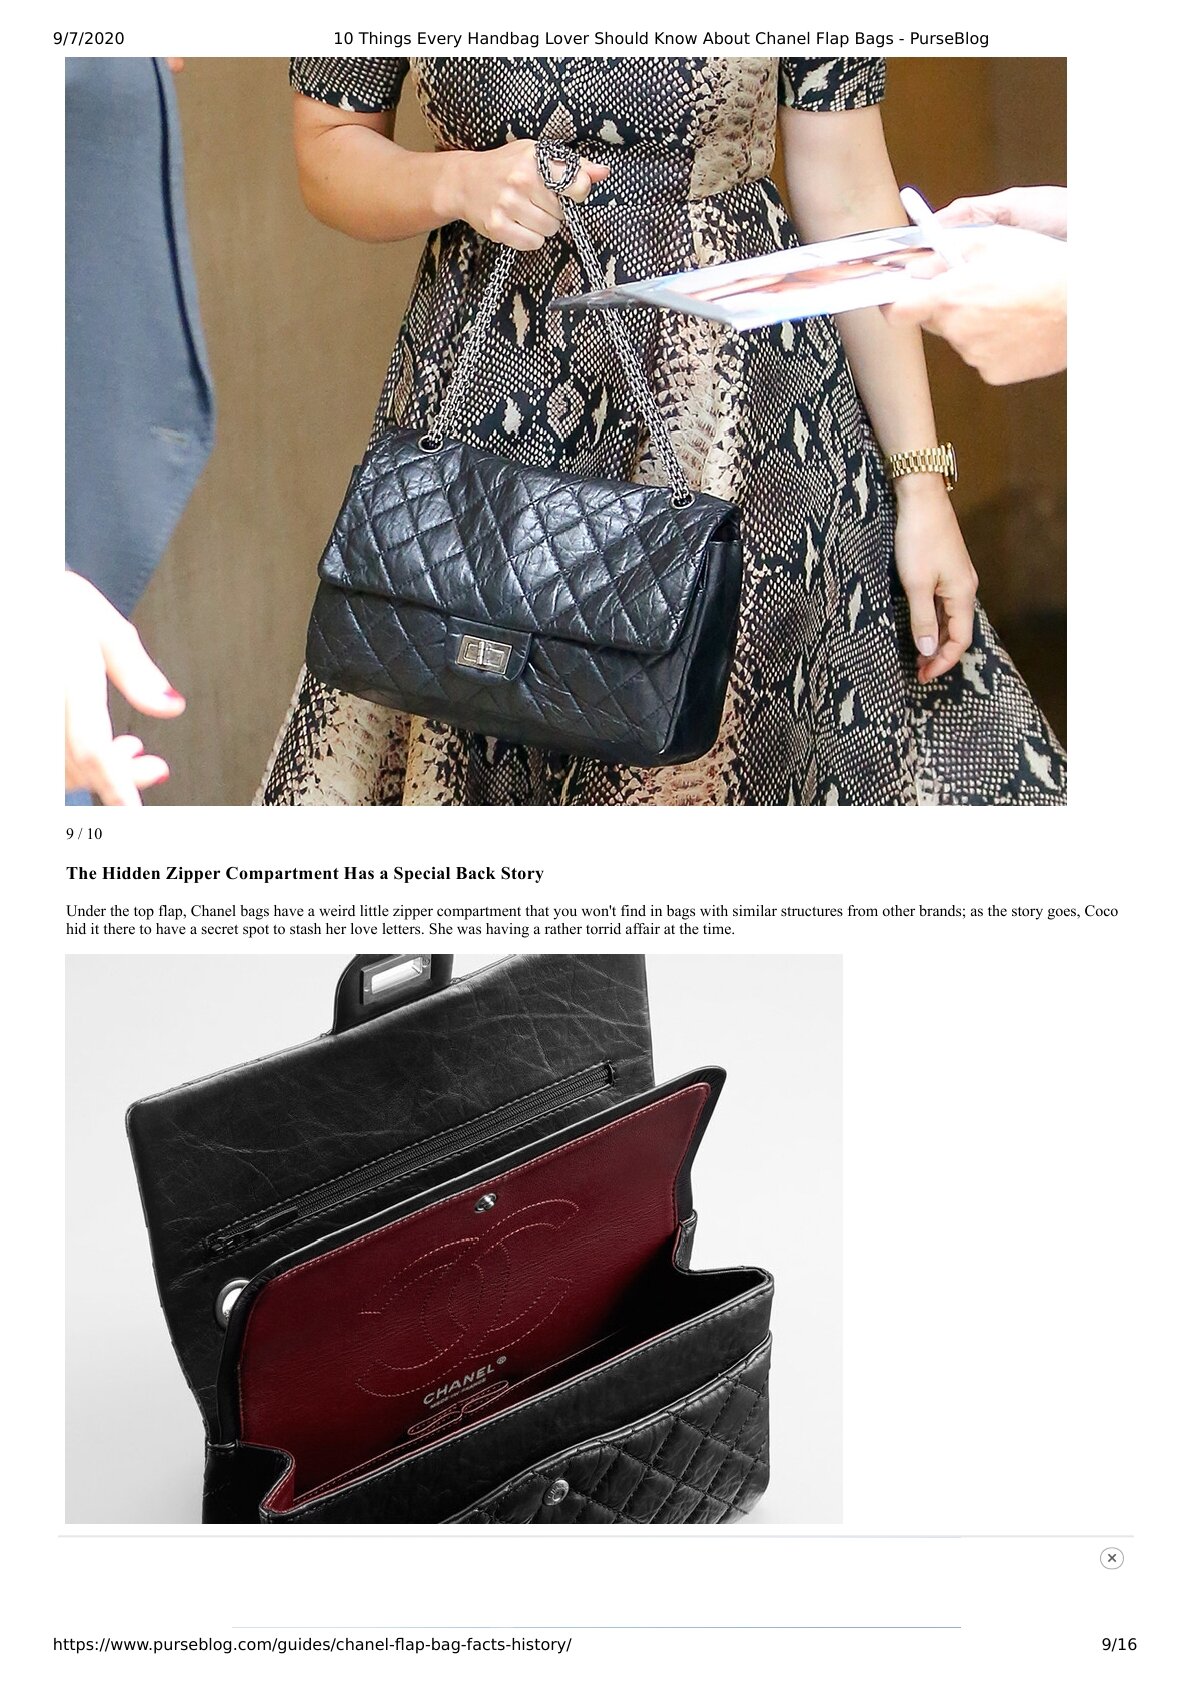 22. 10 Things Every Handbag Lover Should Know About Chanel Flap